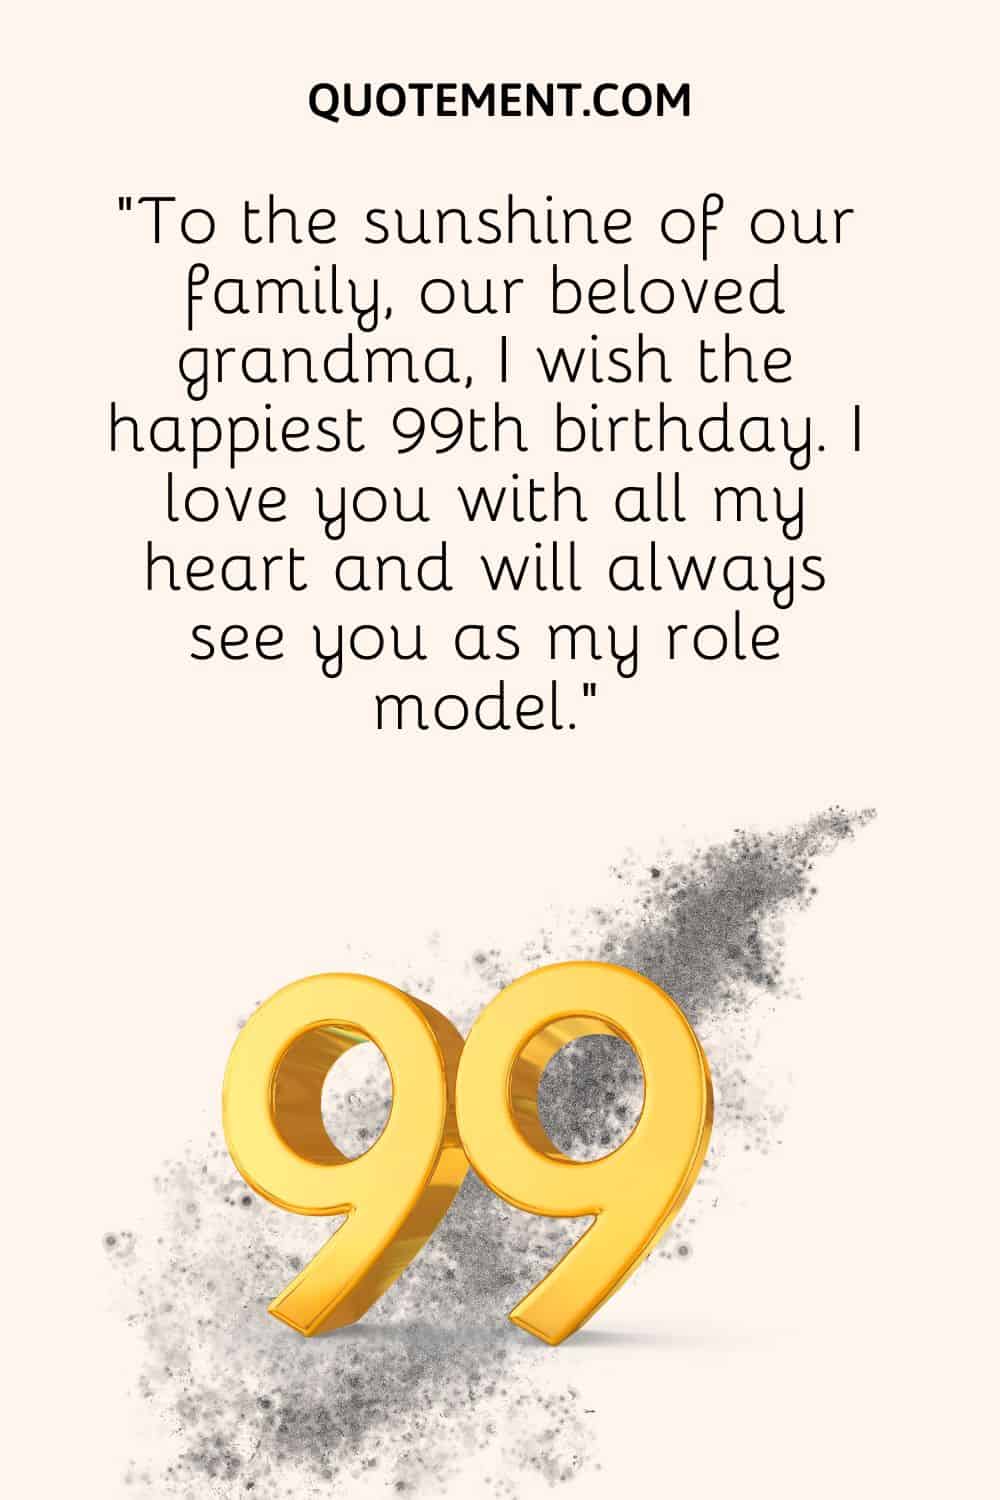 To the sunshine of our family, our beloved grandma, I wish the happiest 99th birthday